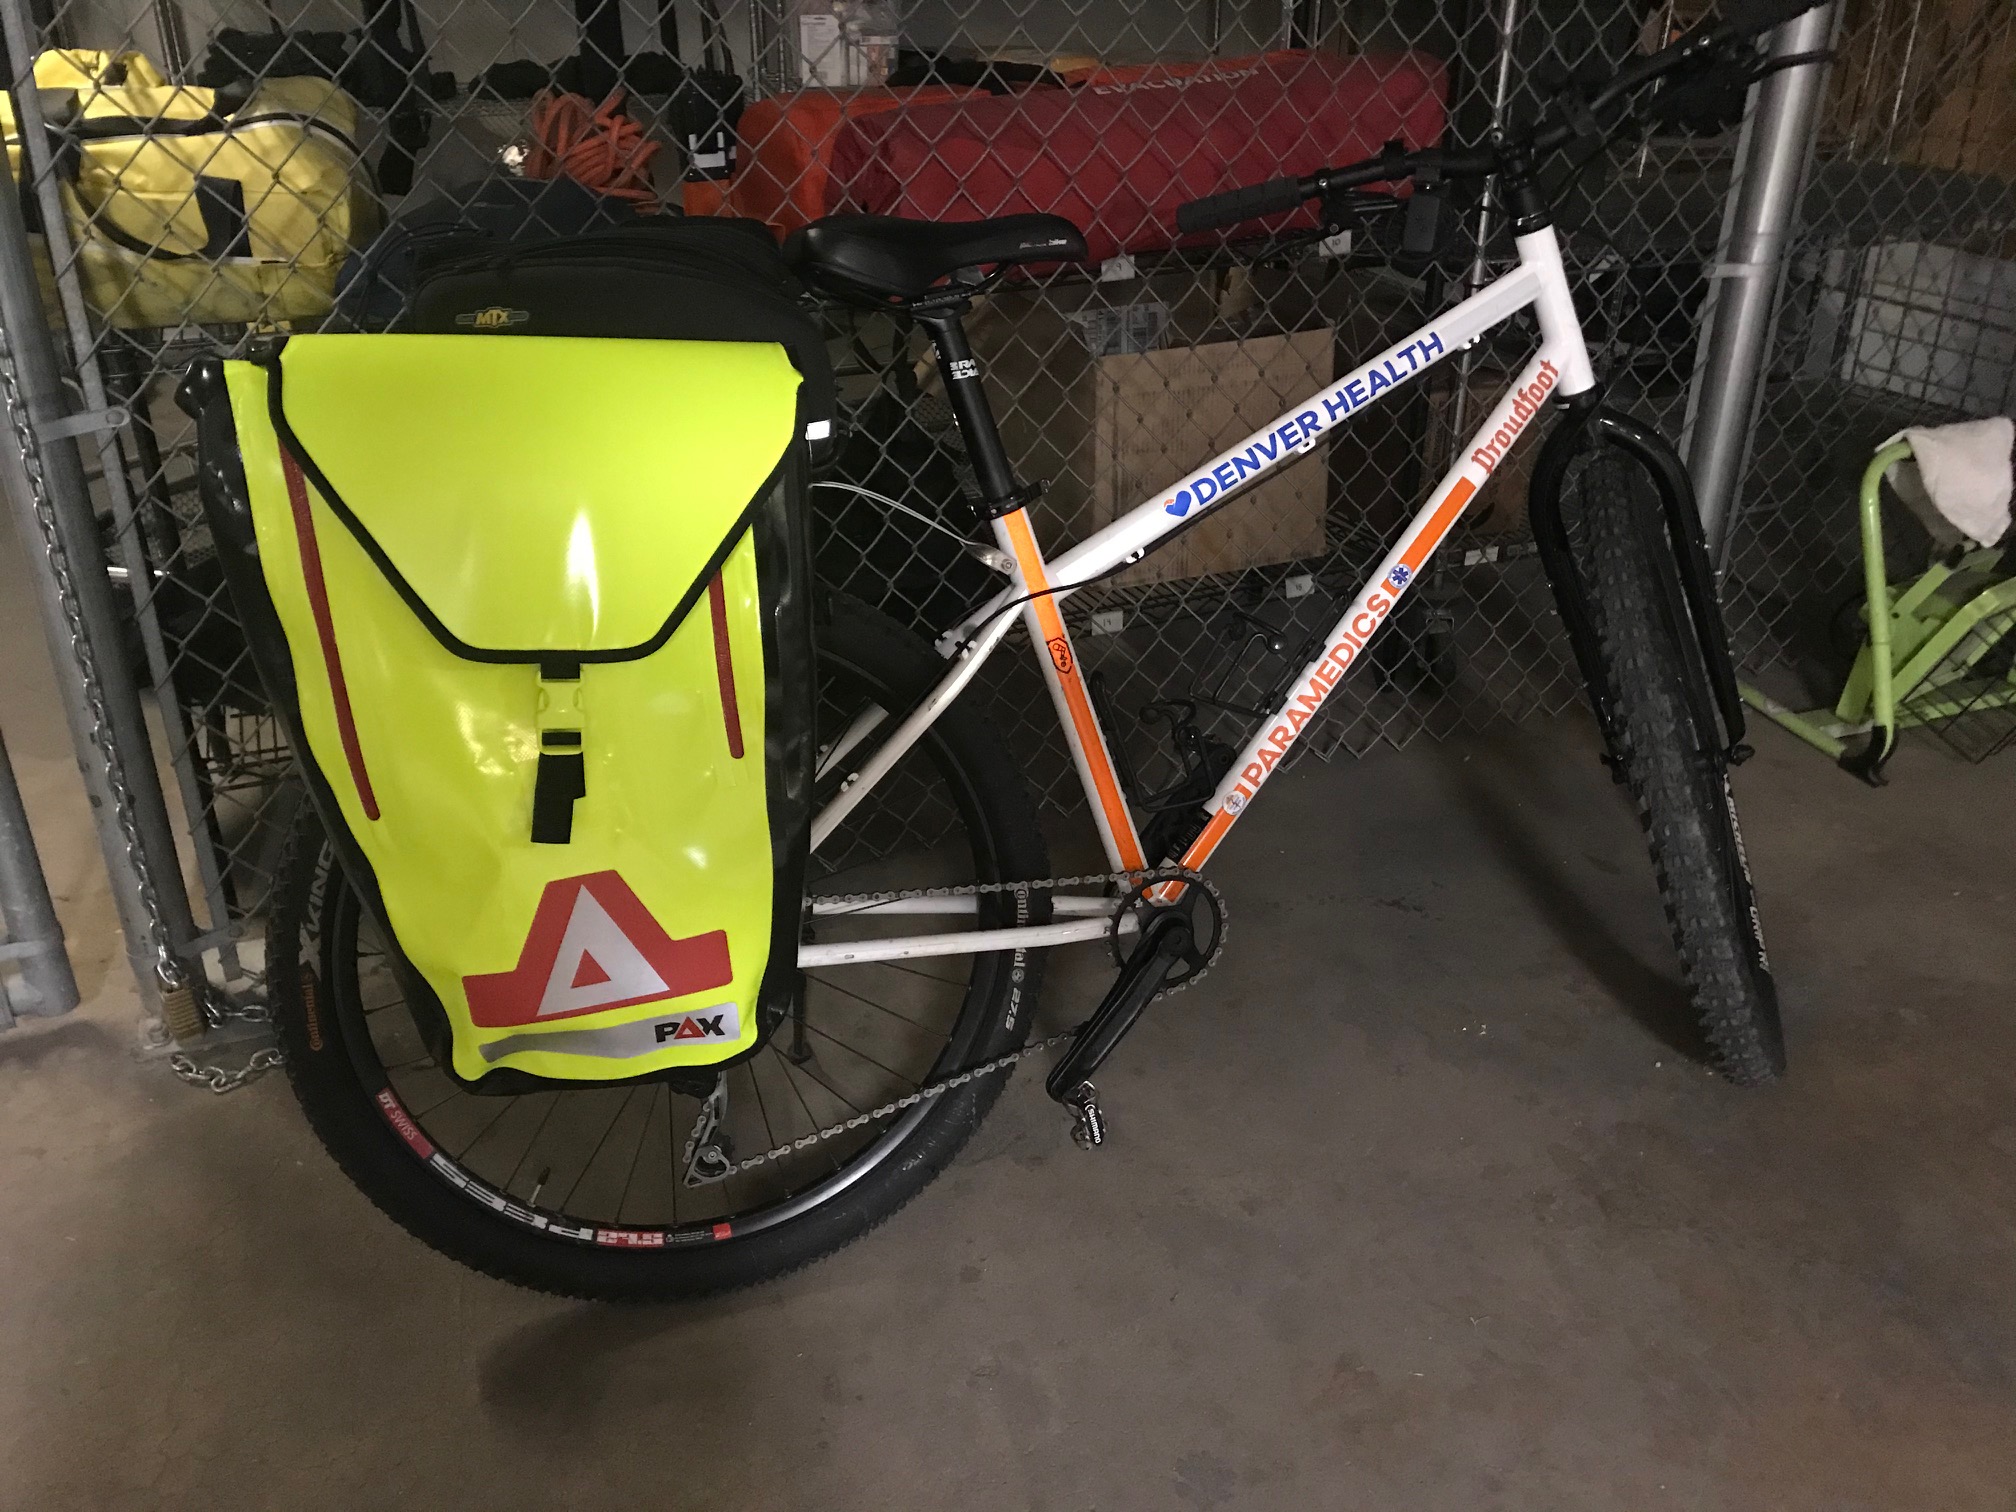 Pax Bicycle Bag L:  Functional and Visible